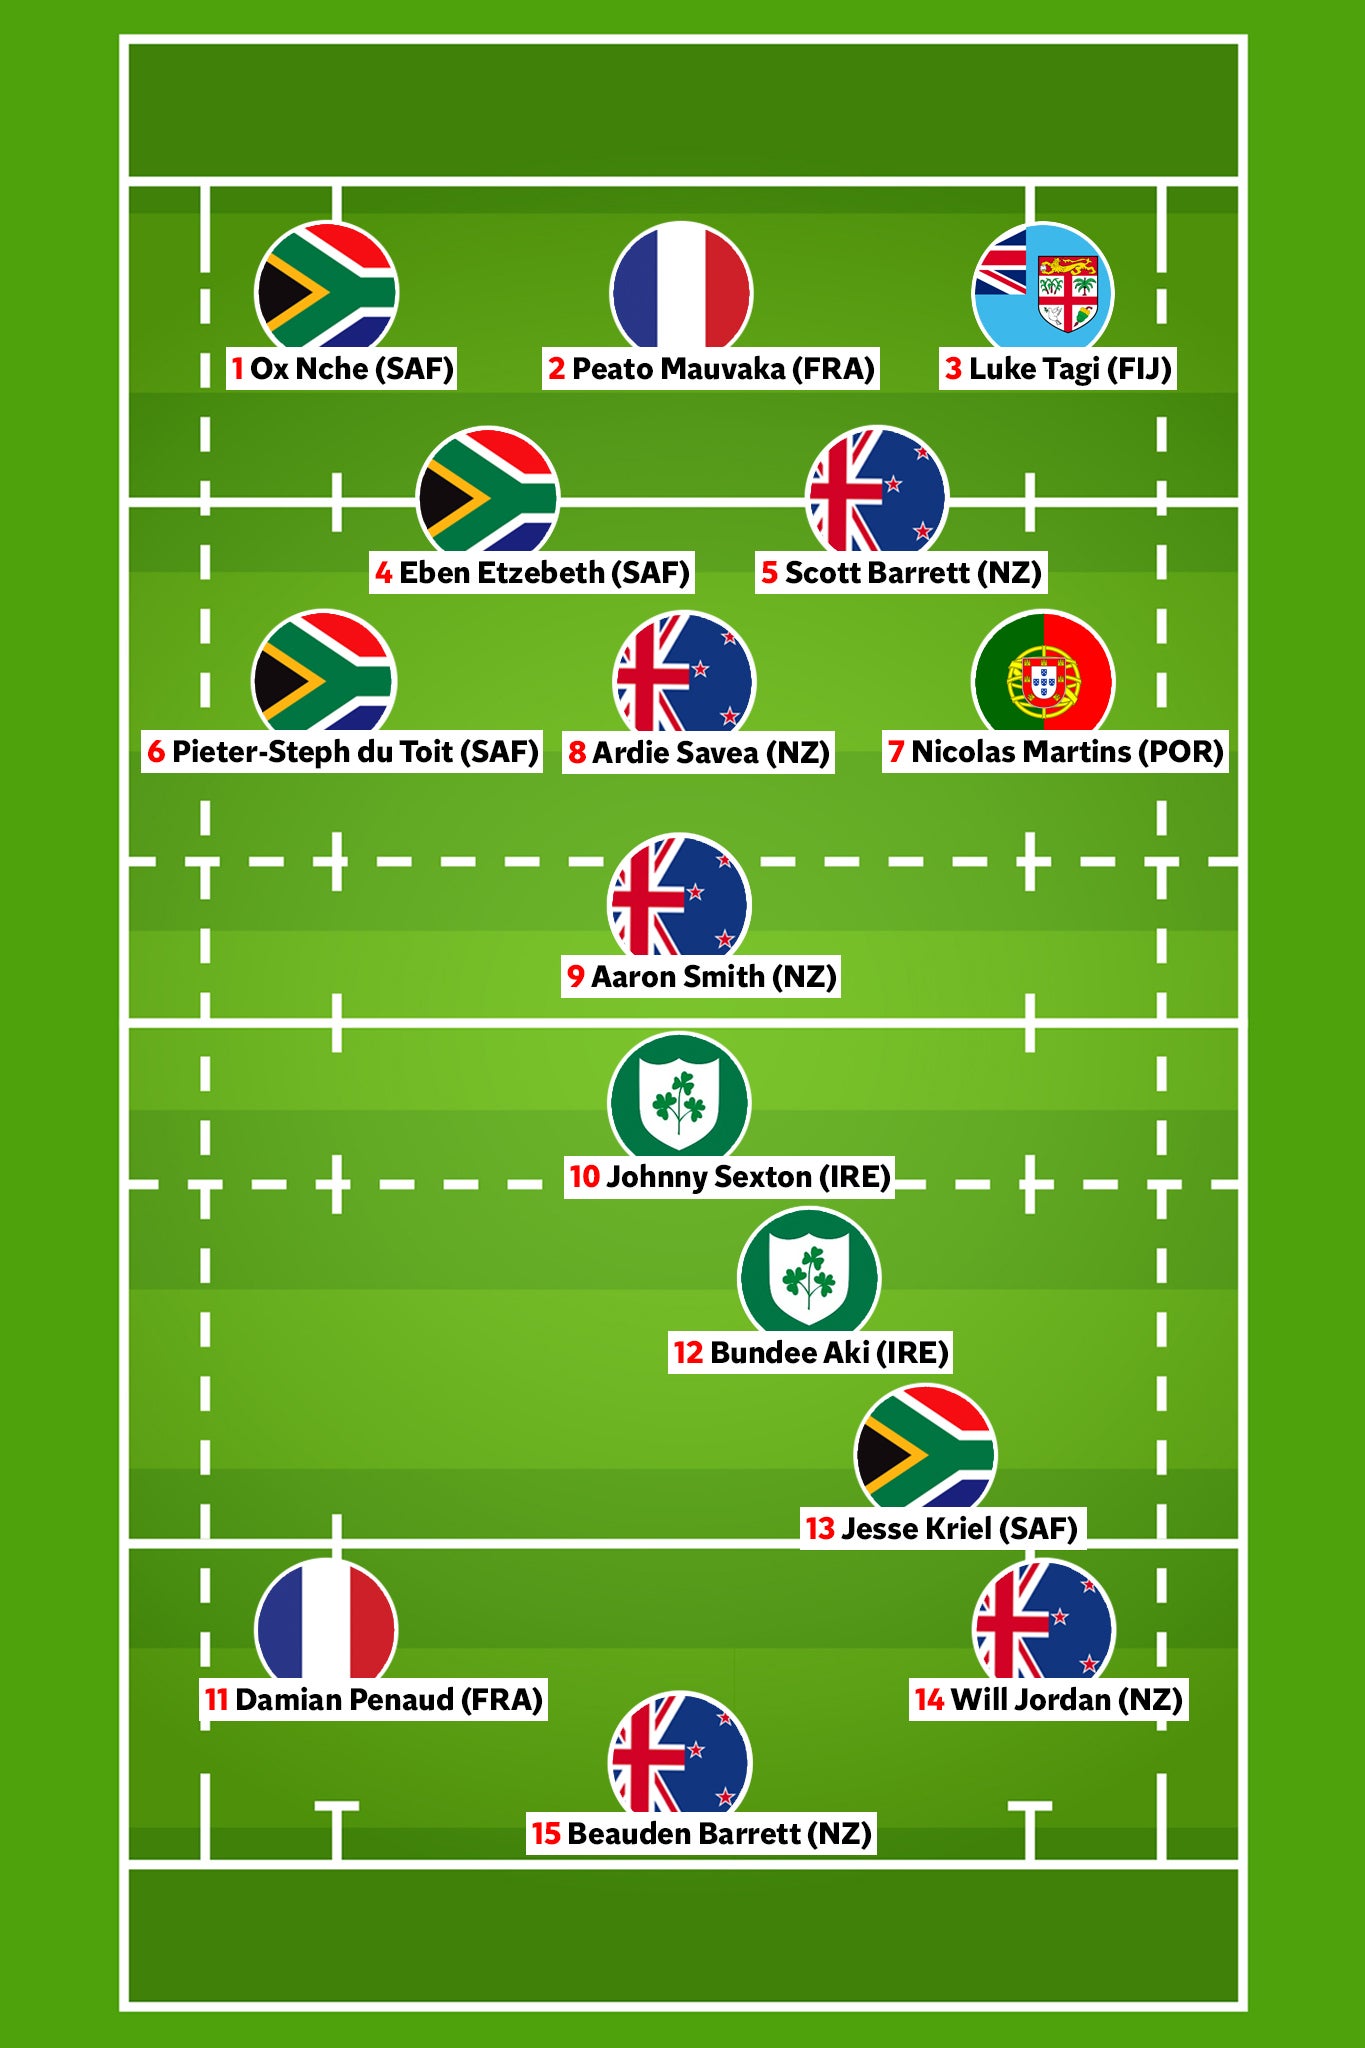 The Independent’s Rugby World Cup team of the tournament